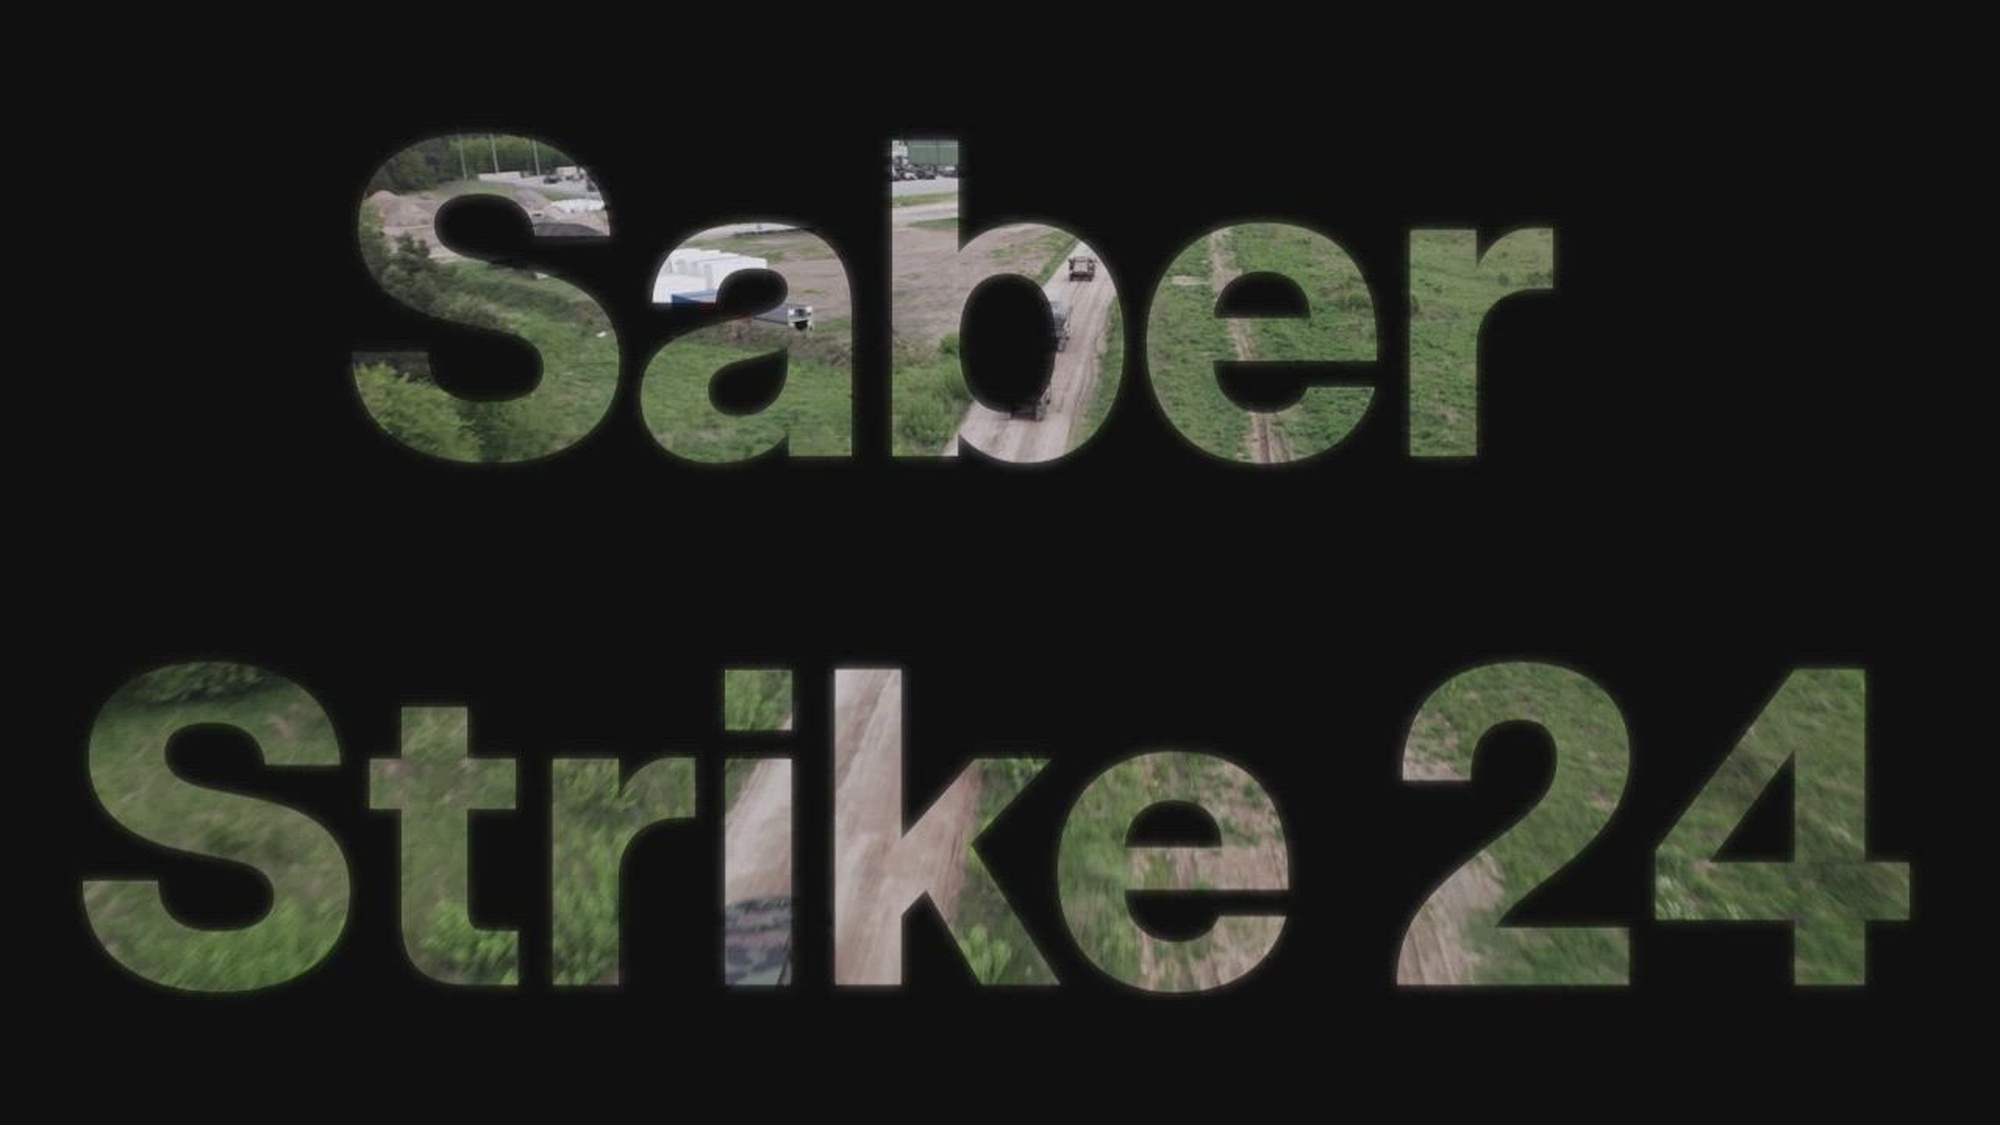 Defender 24, the largest U.S. Army exercise in Europe, kicks off with Saber Strike 24 at Vilseck, Germany, April 9, 2024. Saber Strike 24 is a U.S. Army Europe-led training exercise designed to demonstrate combat readiness between allies and partner nations. (U.S. Army Video by Sgt. 1st Class Joseph Tolliver)